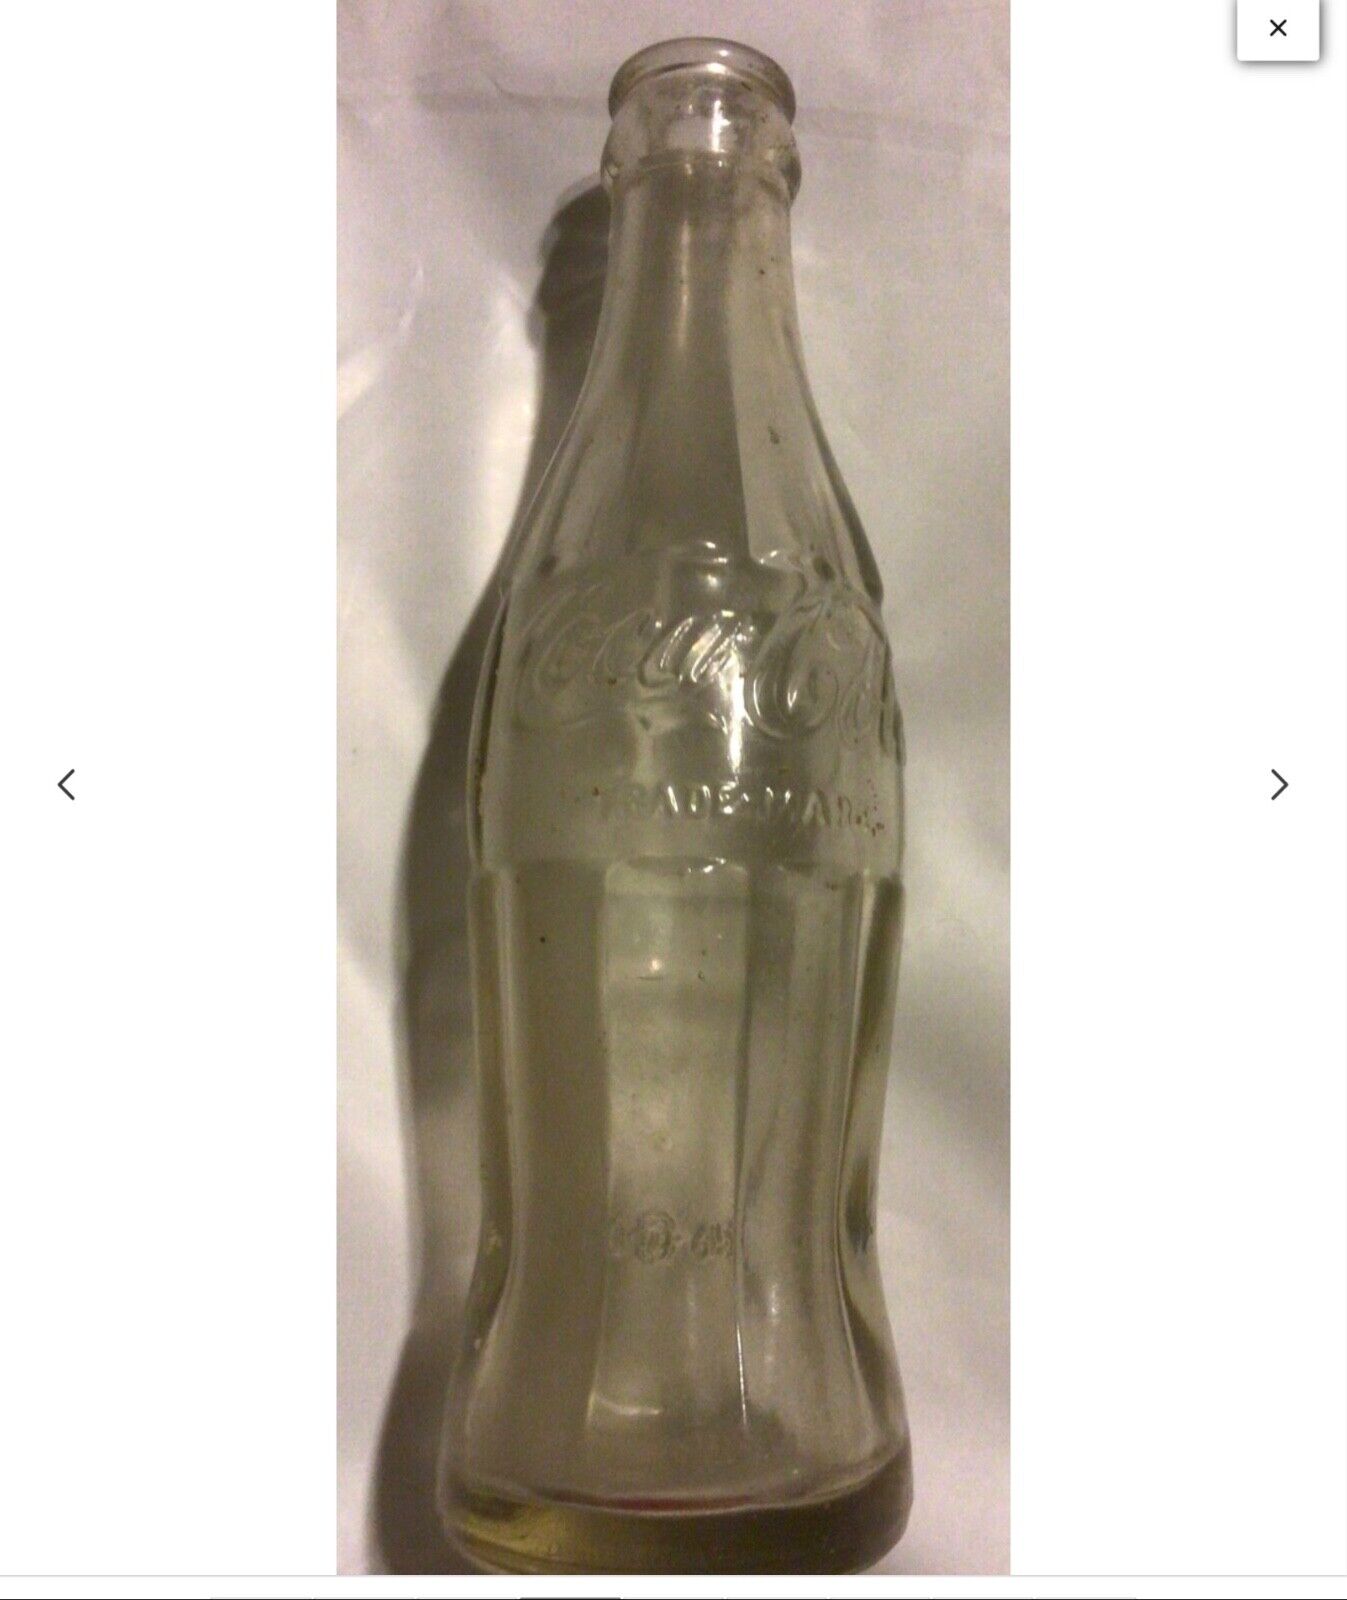 1945 Battle Of Okinawa Coca Cola Bottle Military Issued Coke found@Japan